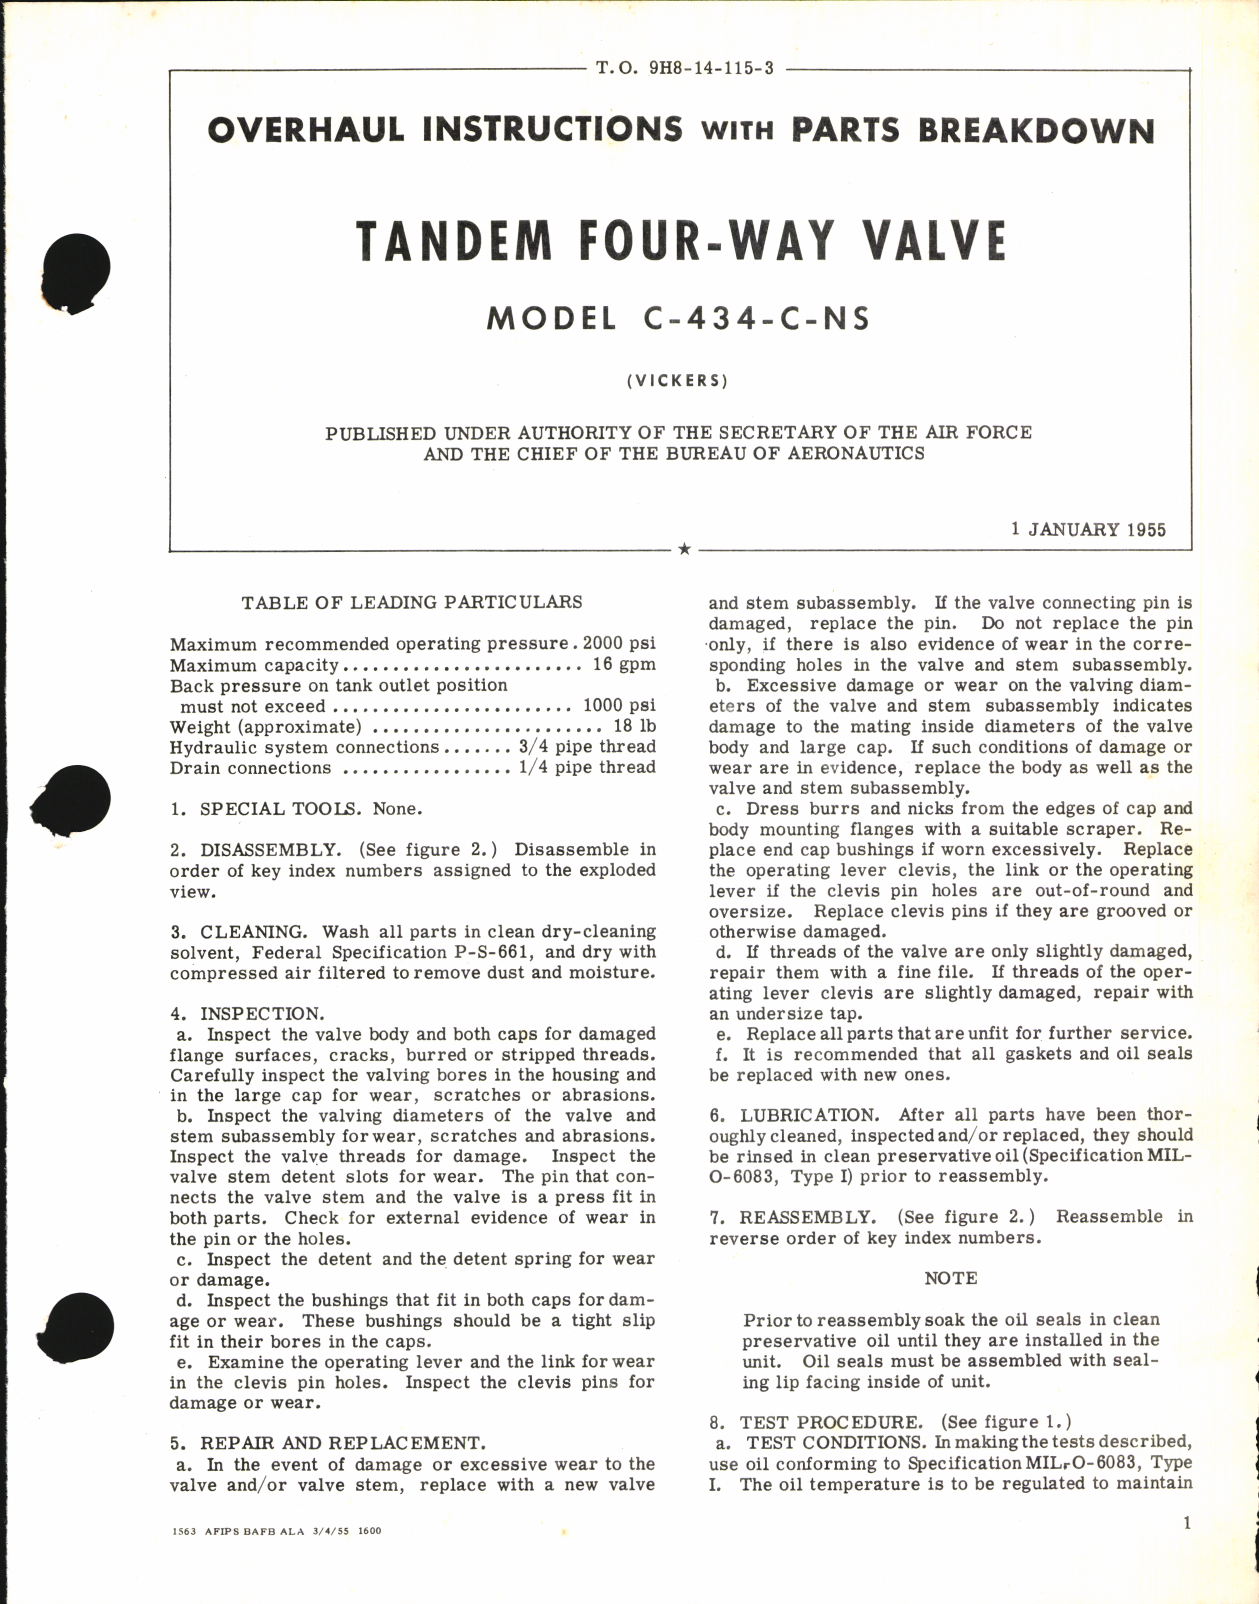 Sample page 1 from AirCorps Library document: Overhaul Instructions with Parts Breakdown for Tandem Four-Way Valve Model C-434-C-NS